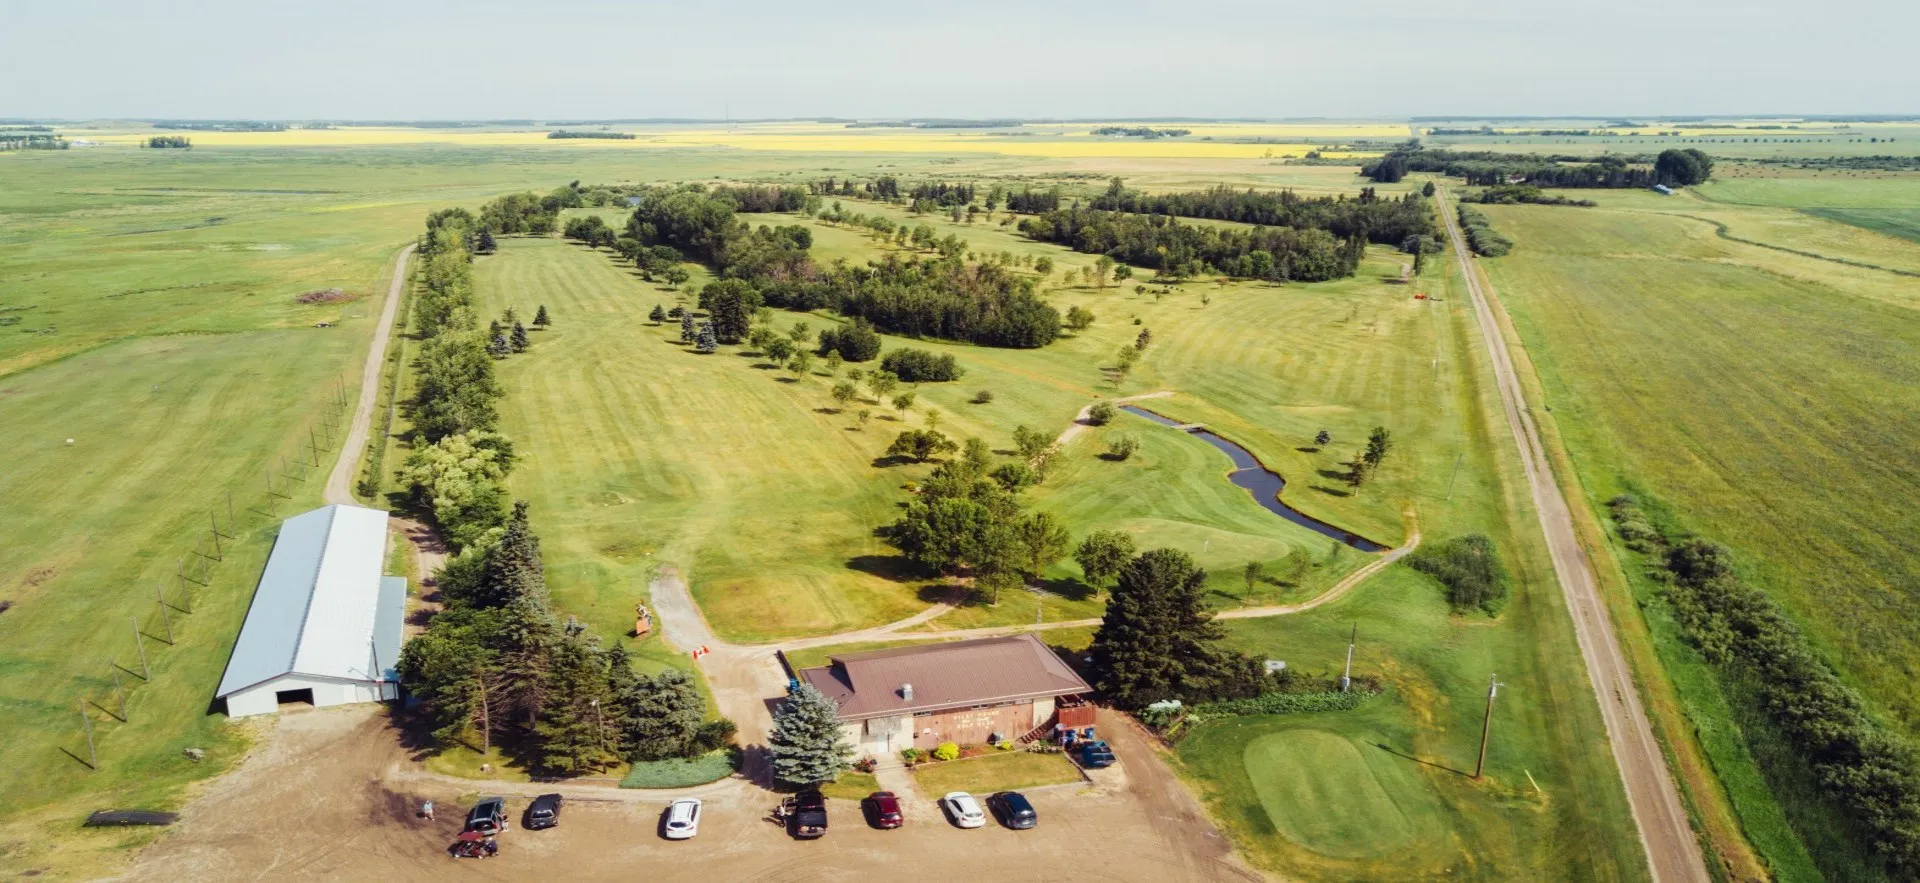 Overhead picture of Pilot Mound Golf Course